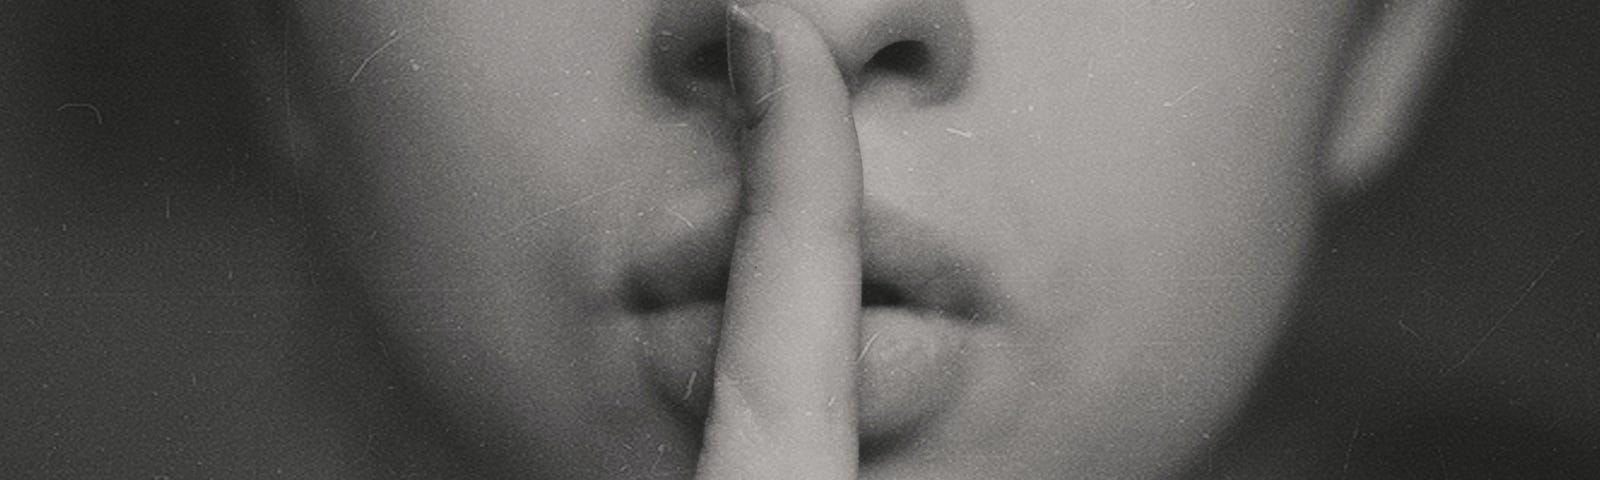 Image of woman with finger in front of mouth to silence others.